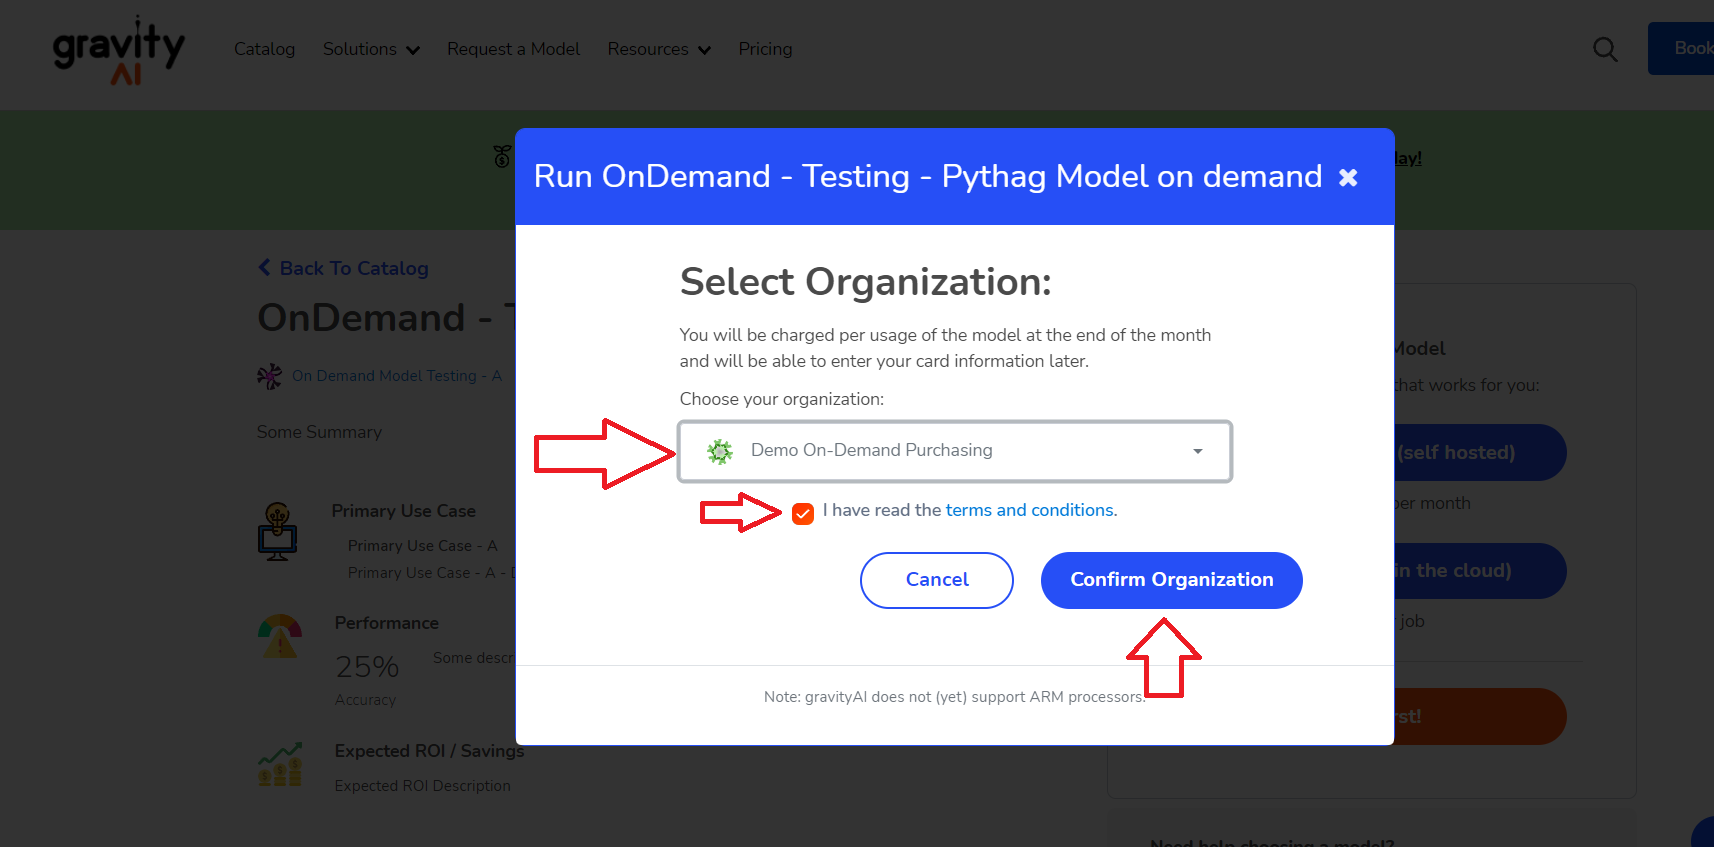 Select the organization you want to run the on-demand model